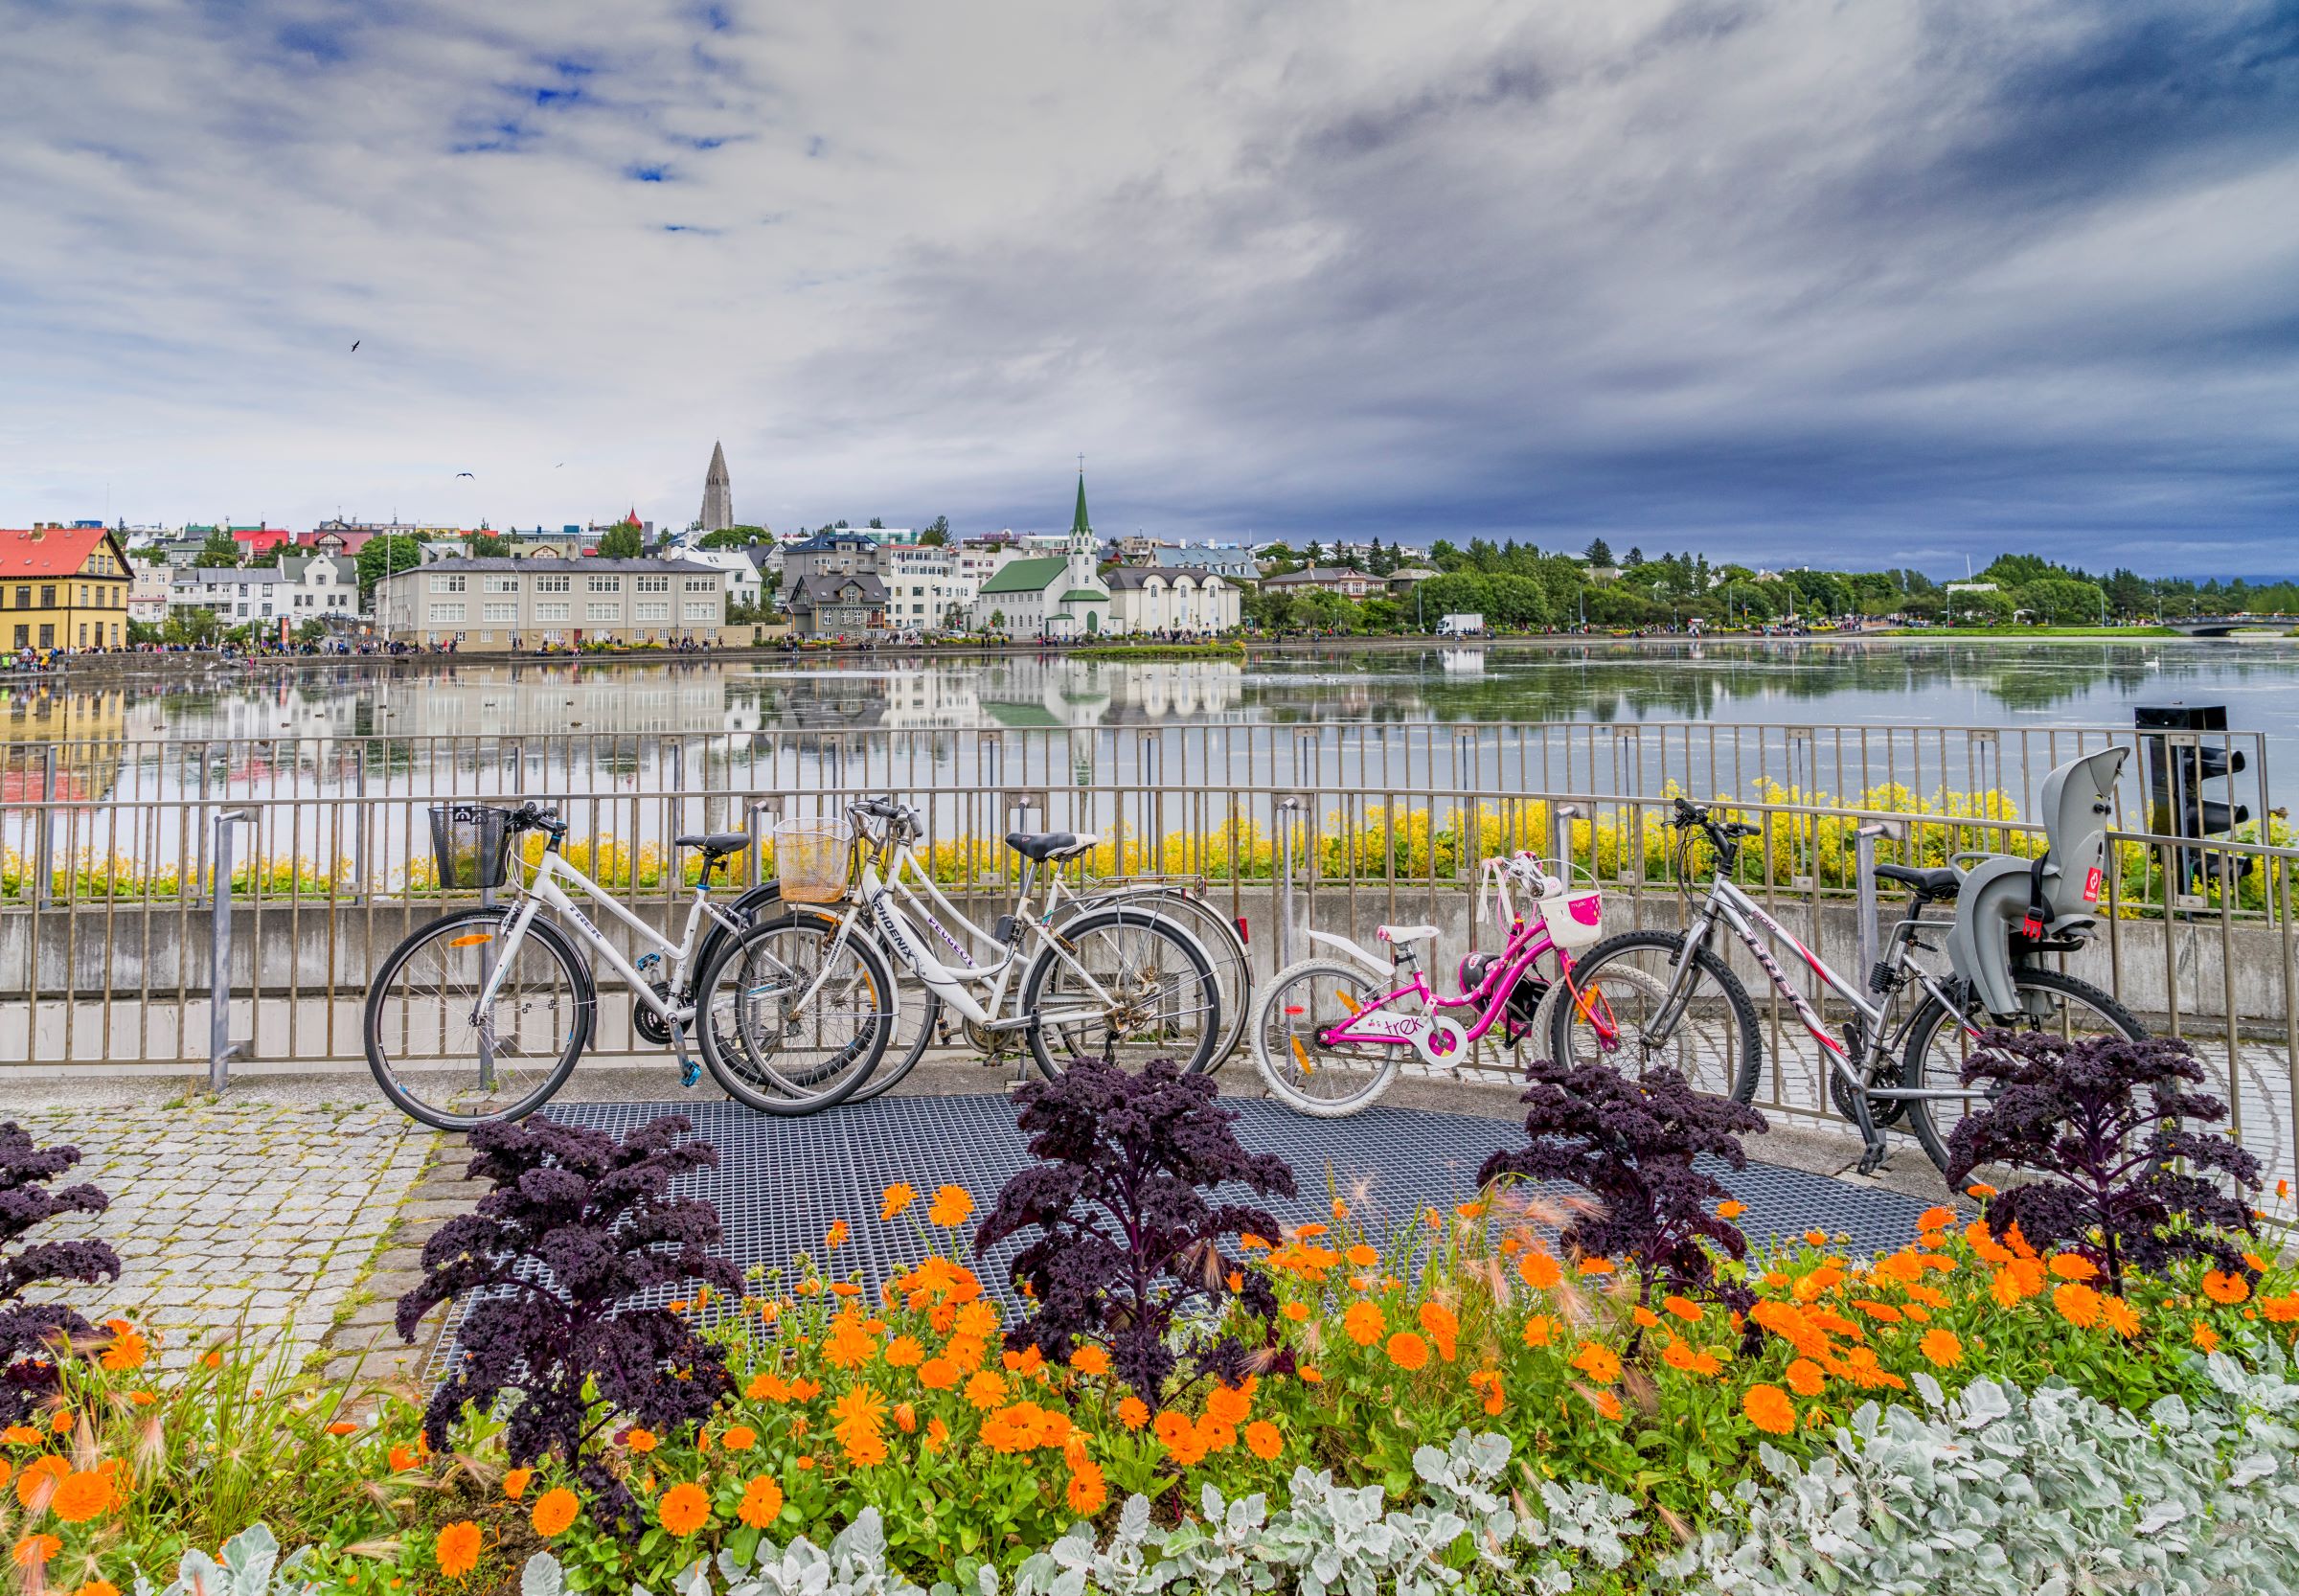 Tjornin lake in Reykjavik pictured from the City Hall side with bikes positioned in the foreground of the picture